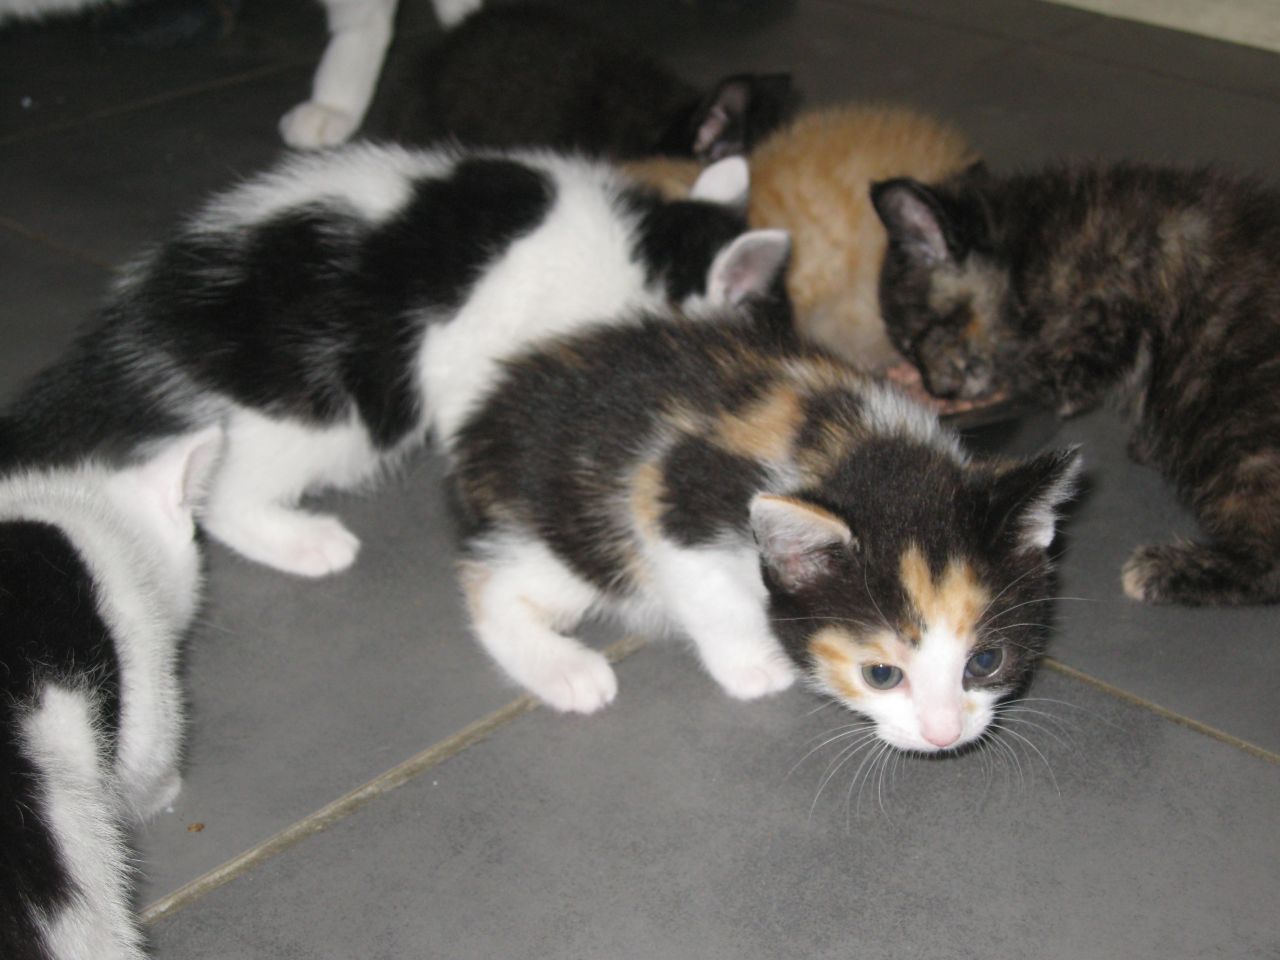 Group Of Manx Kittens Playing With Each Other